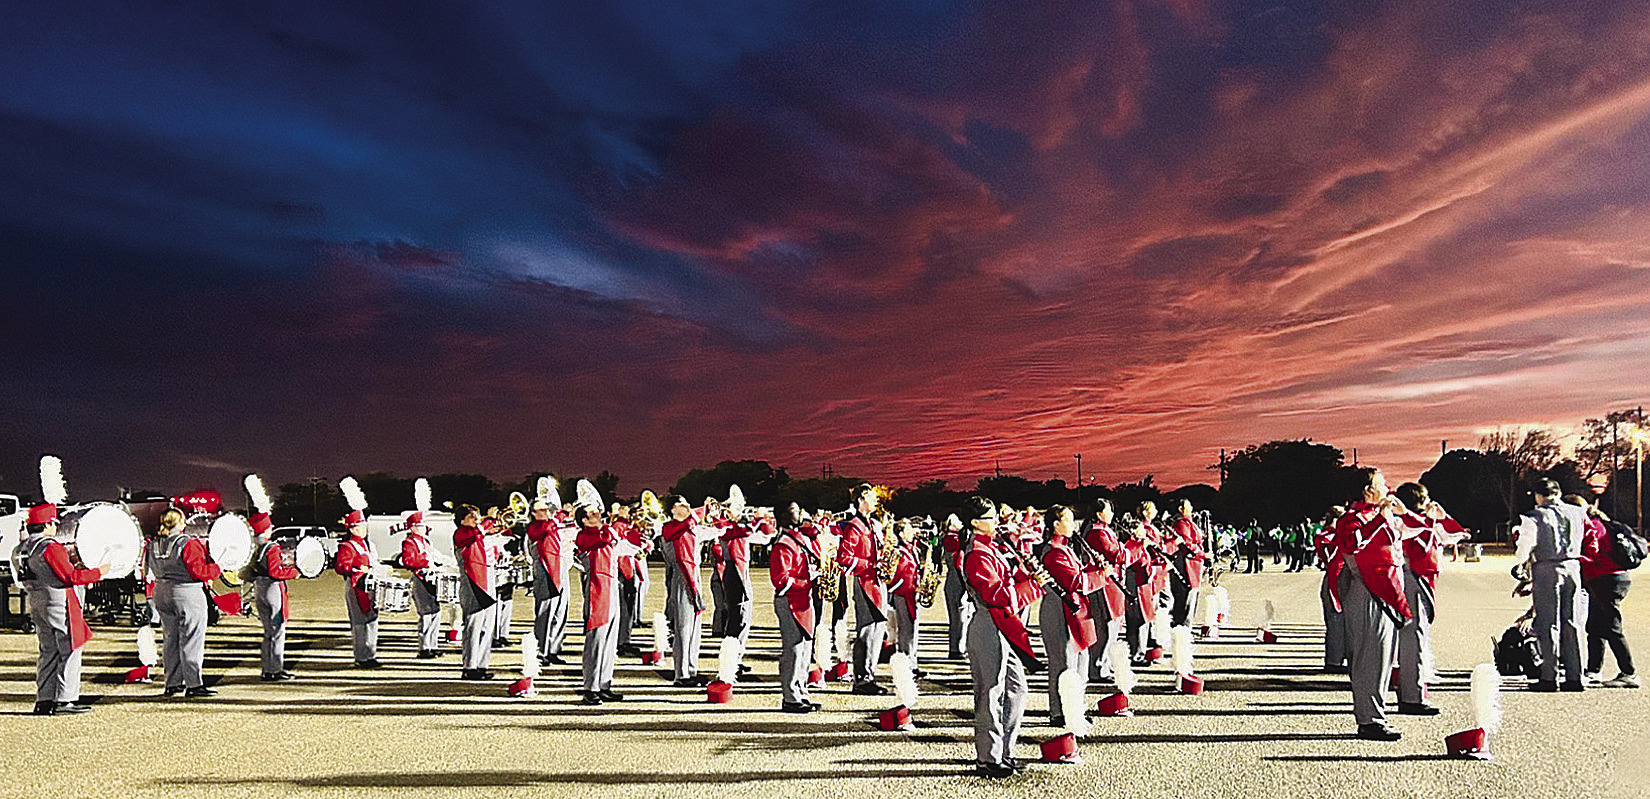 With a Panhandle sunset behind them, members of the Ragin’ Red Band warm up for their second performance in the area competition in Amarillo last Saturday. The musicians made school history by making the finals, breaking into an elite group. Courtesy Photo By Kell i Kreitler